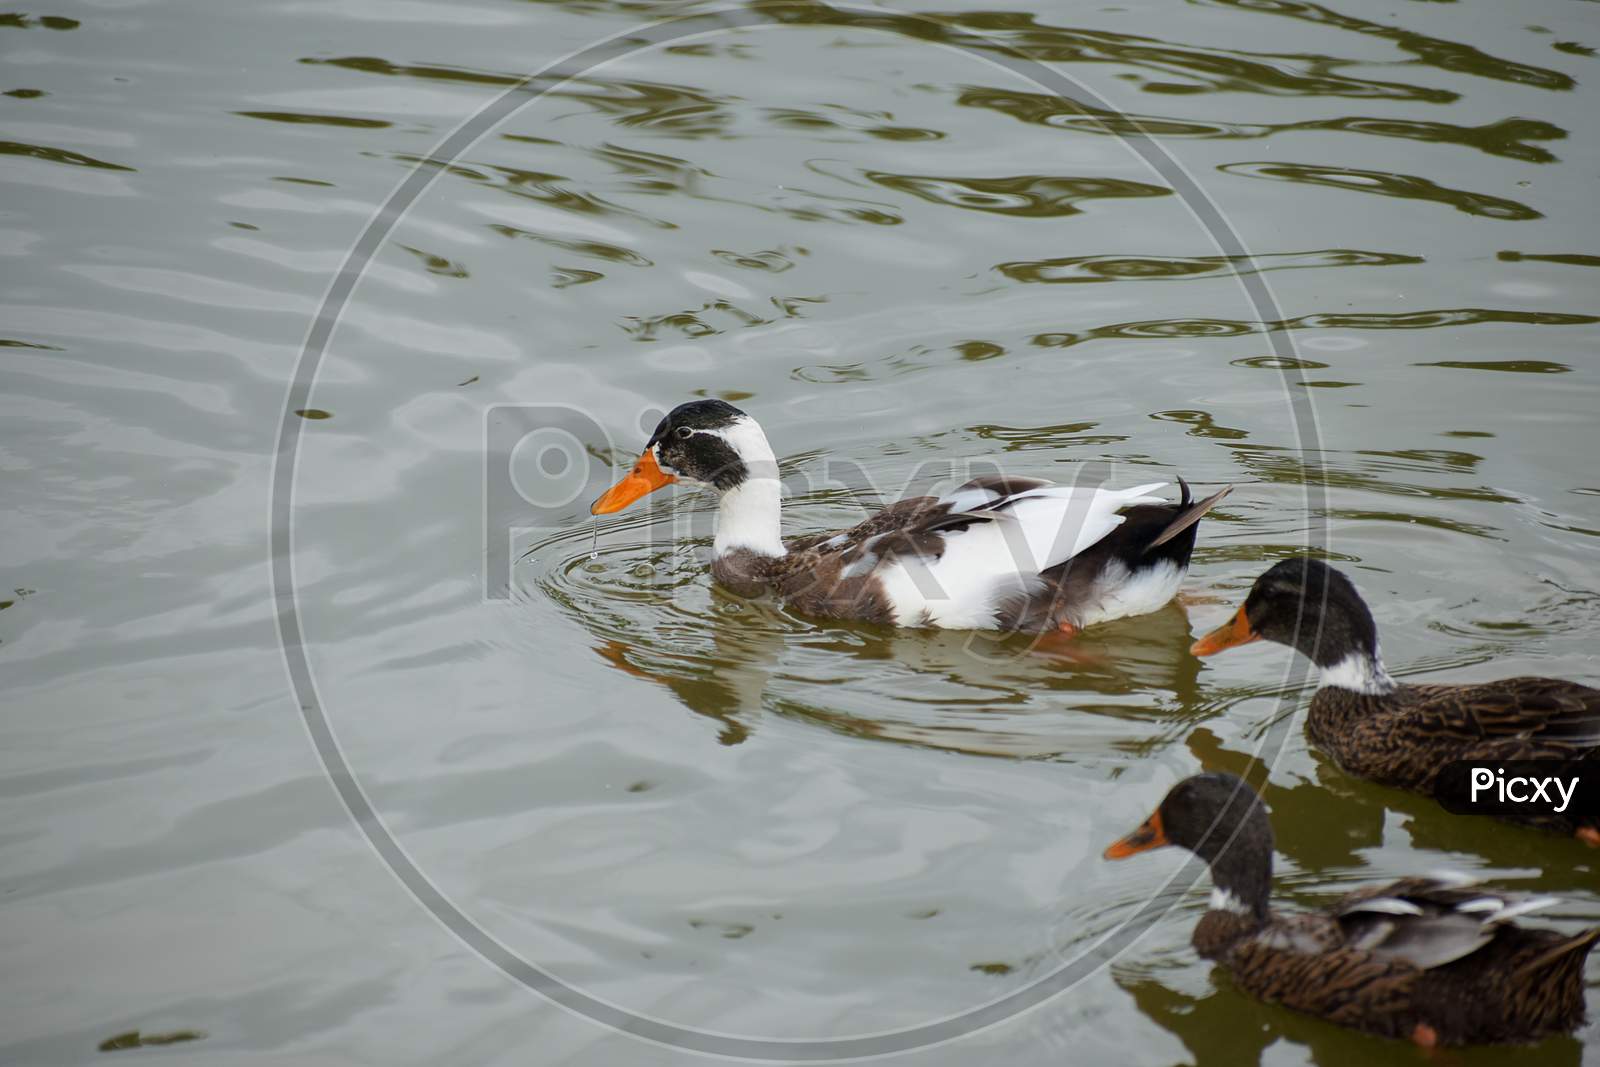 Picture Of Duck Is The Common Name For A Large Number Of Species In The Waterfowl Family Anatidae Which Also Includes Swans And Geese, Swimming In A Pond